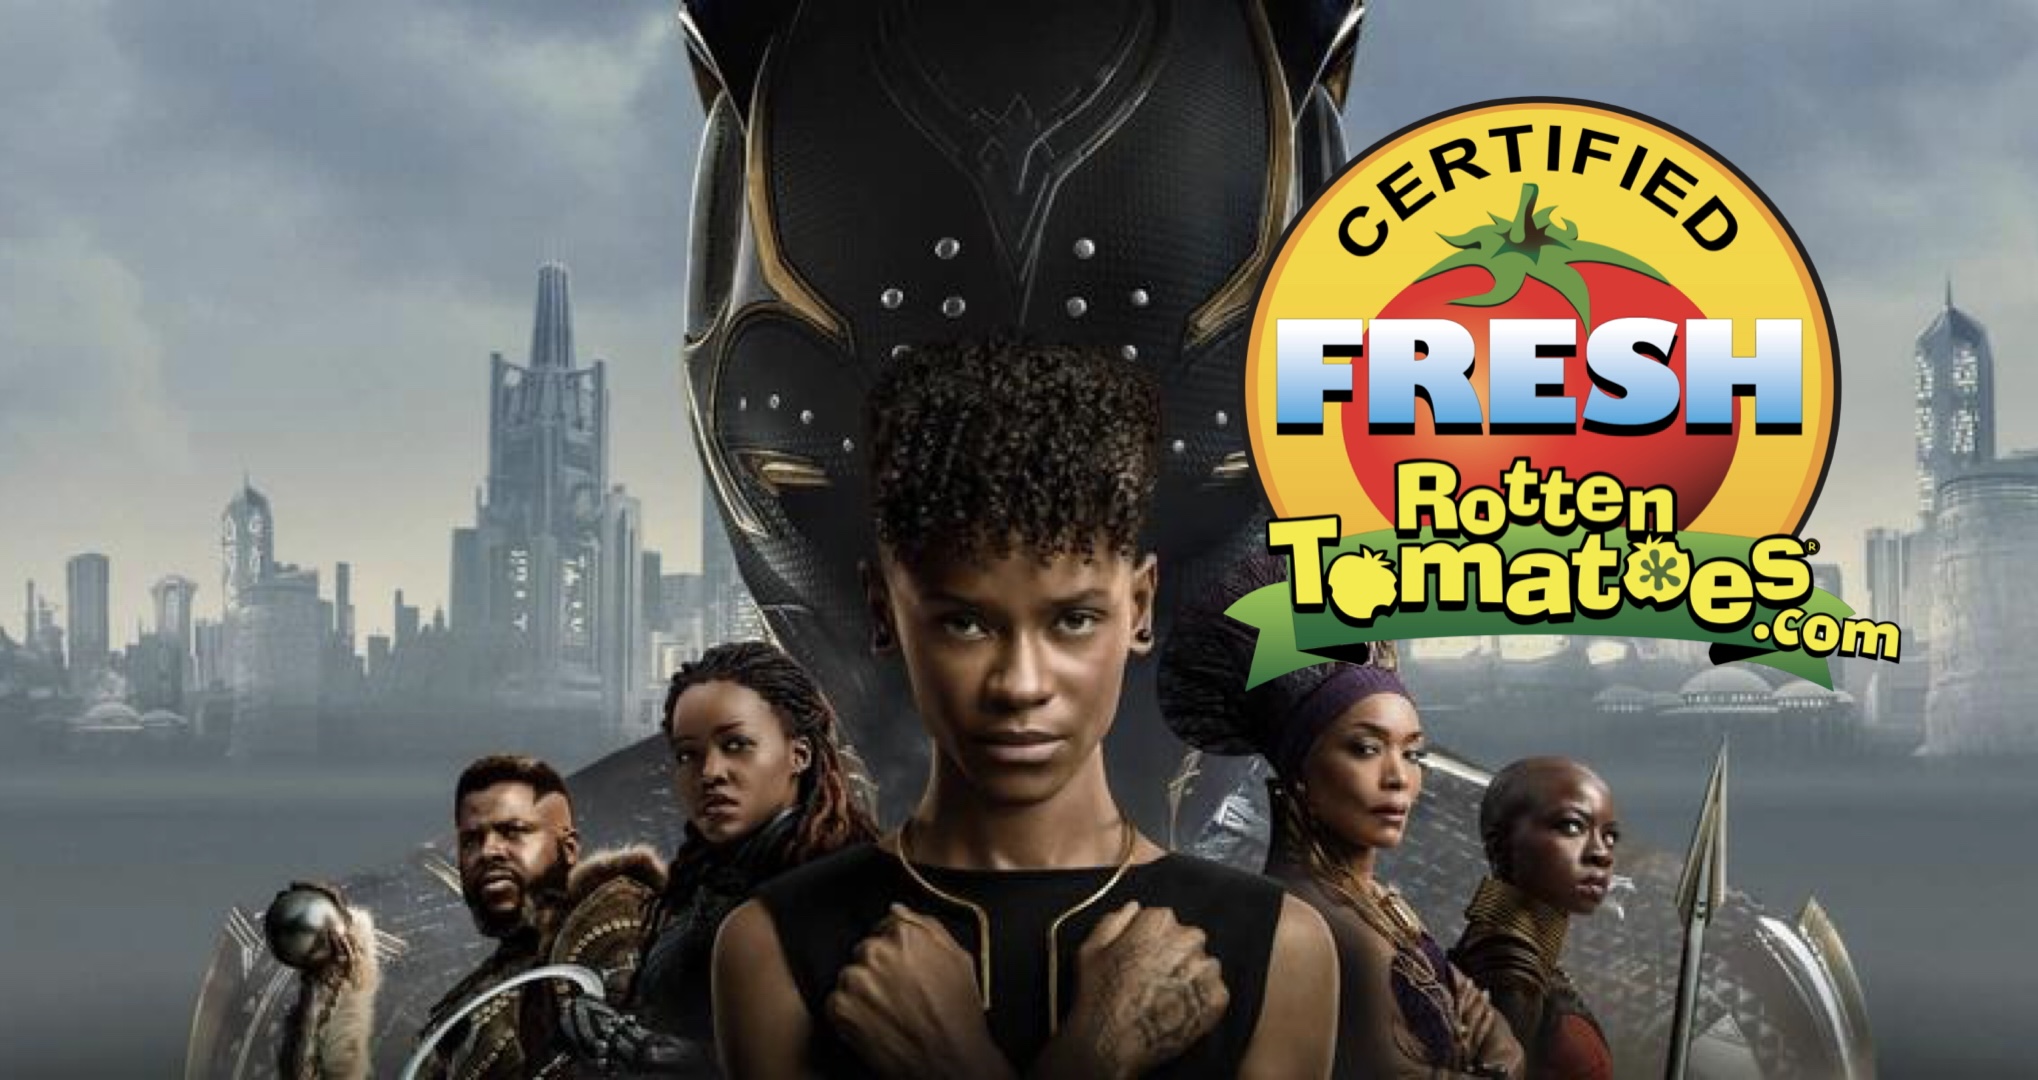 ‘Black Panther: Wakanda Forever’ Is Now “Certified Fresh” on Rotten Tomatoes With 85%